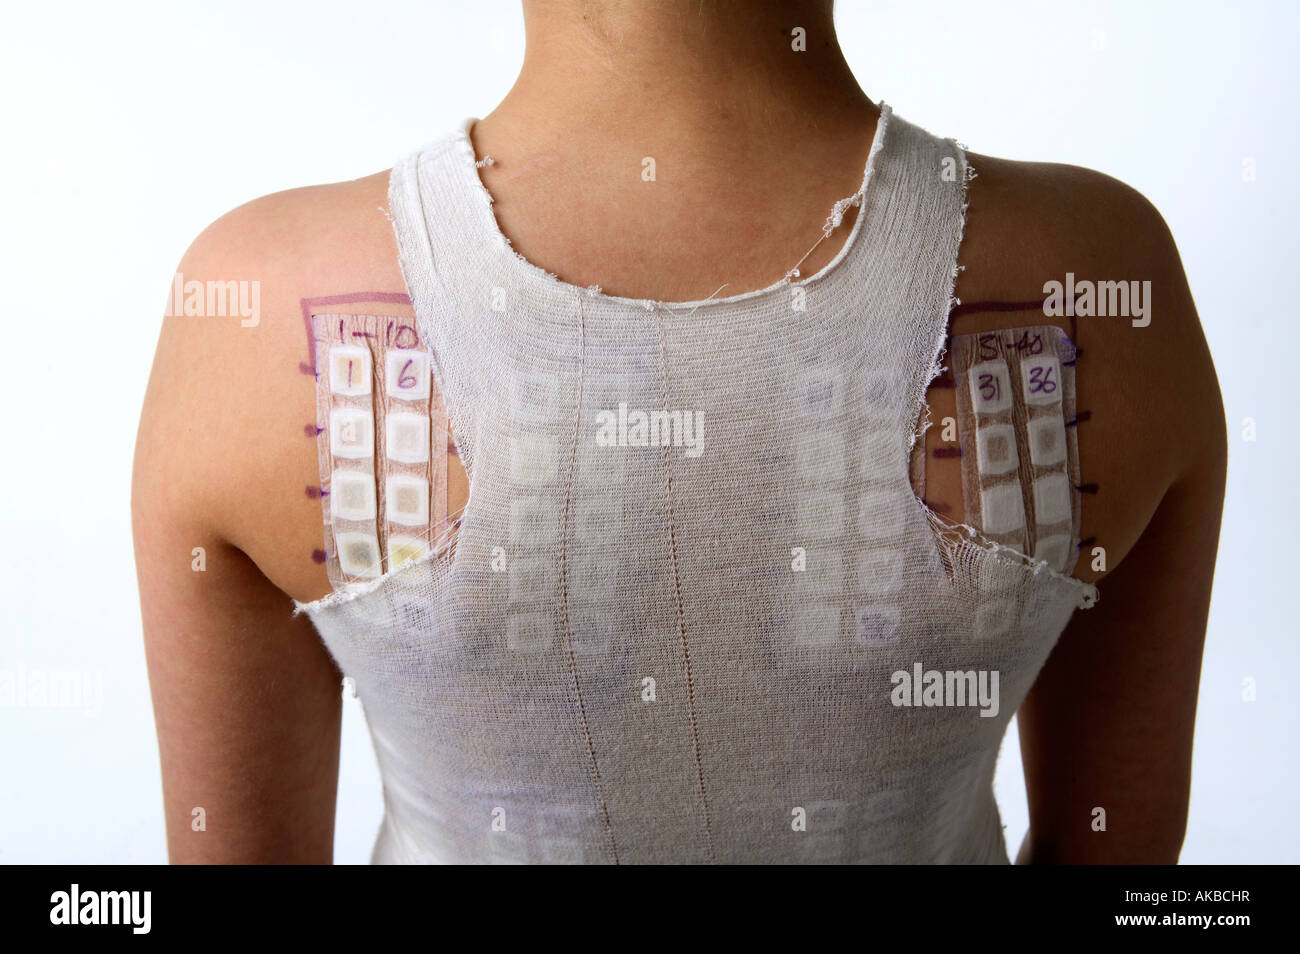 Allergy test patches on a young boy back. Stock Photo